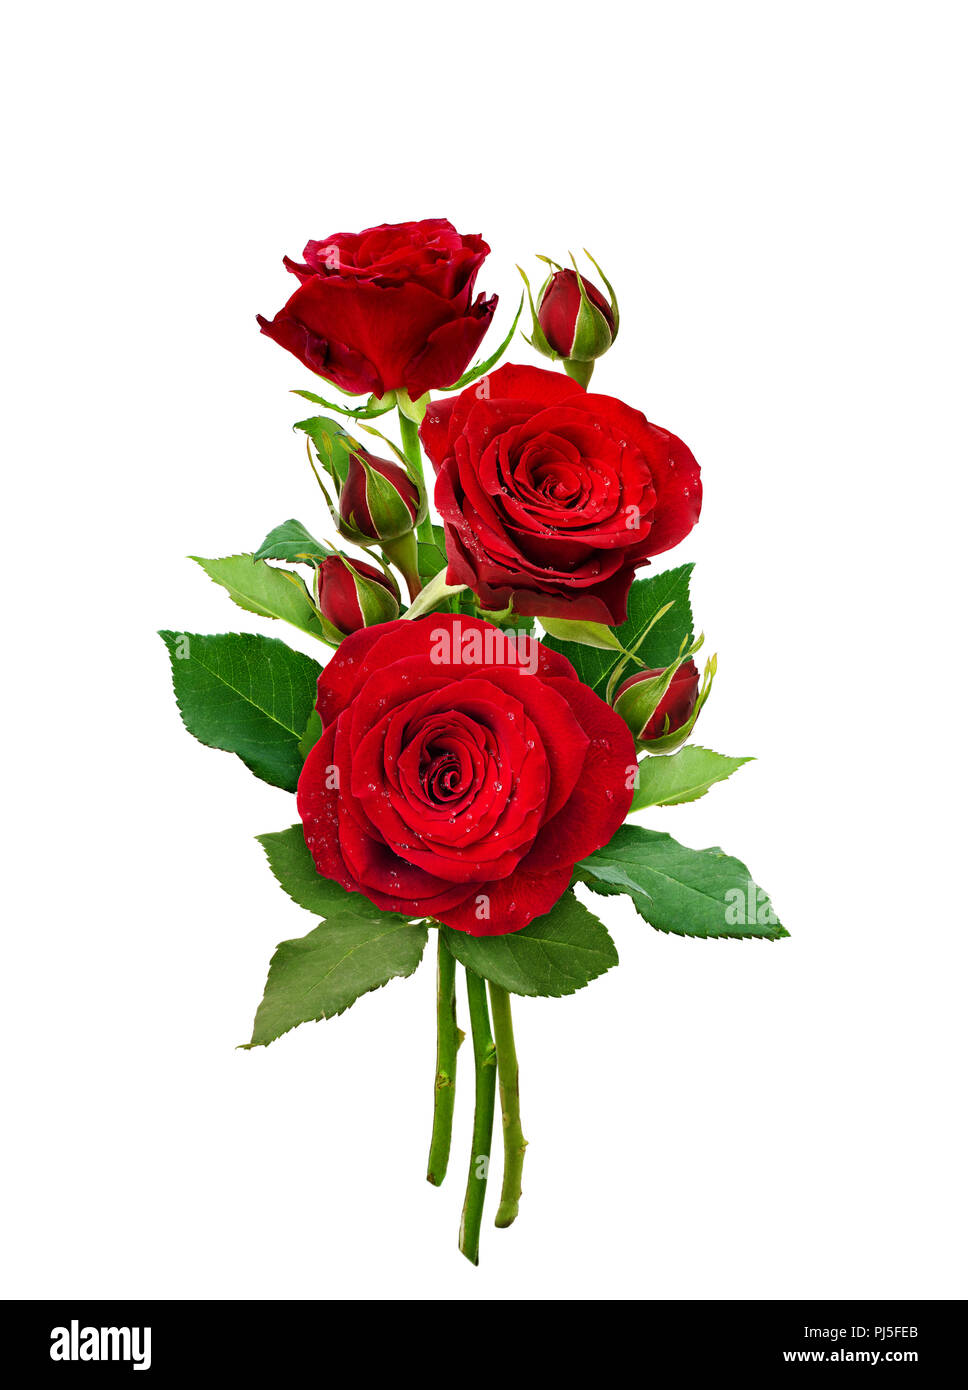 Bouquet of red rose flowers and buds isolated on white Stock Photo - Alamy